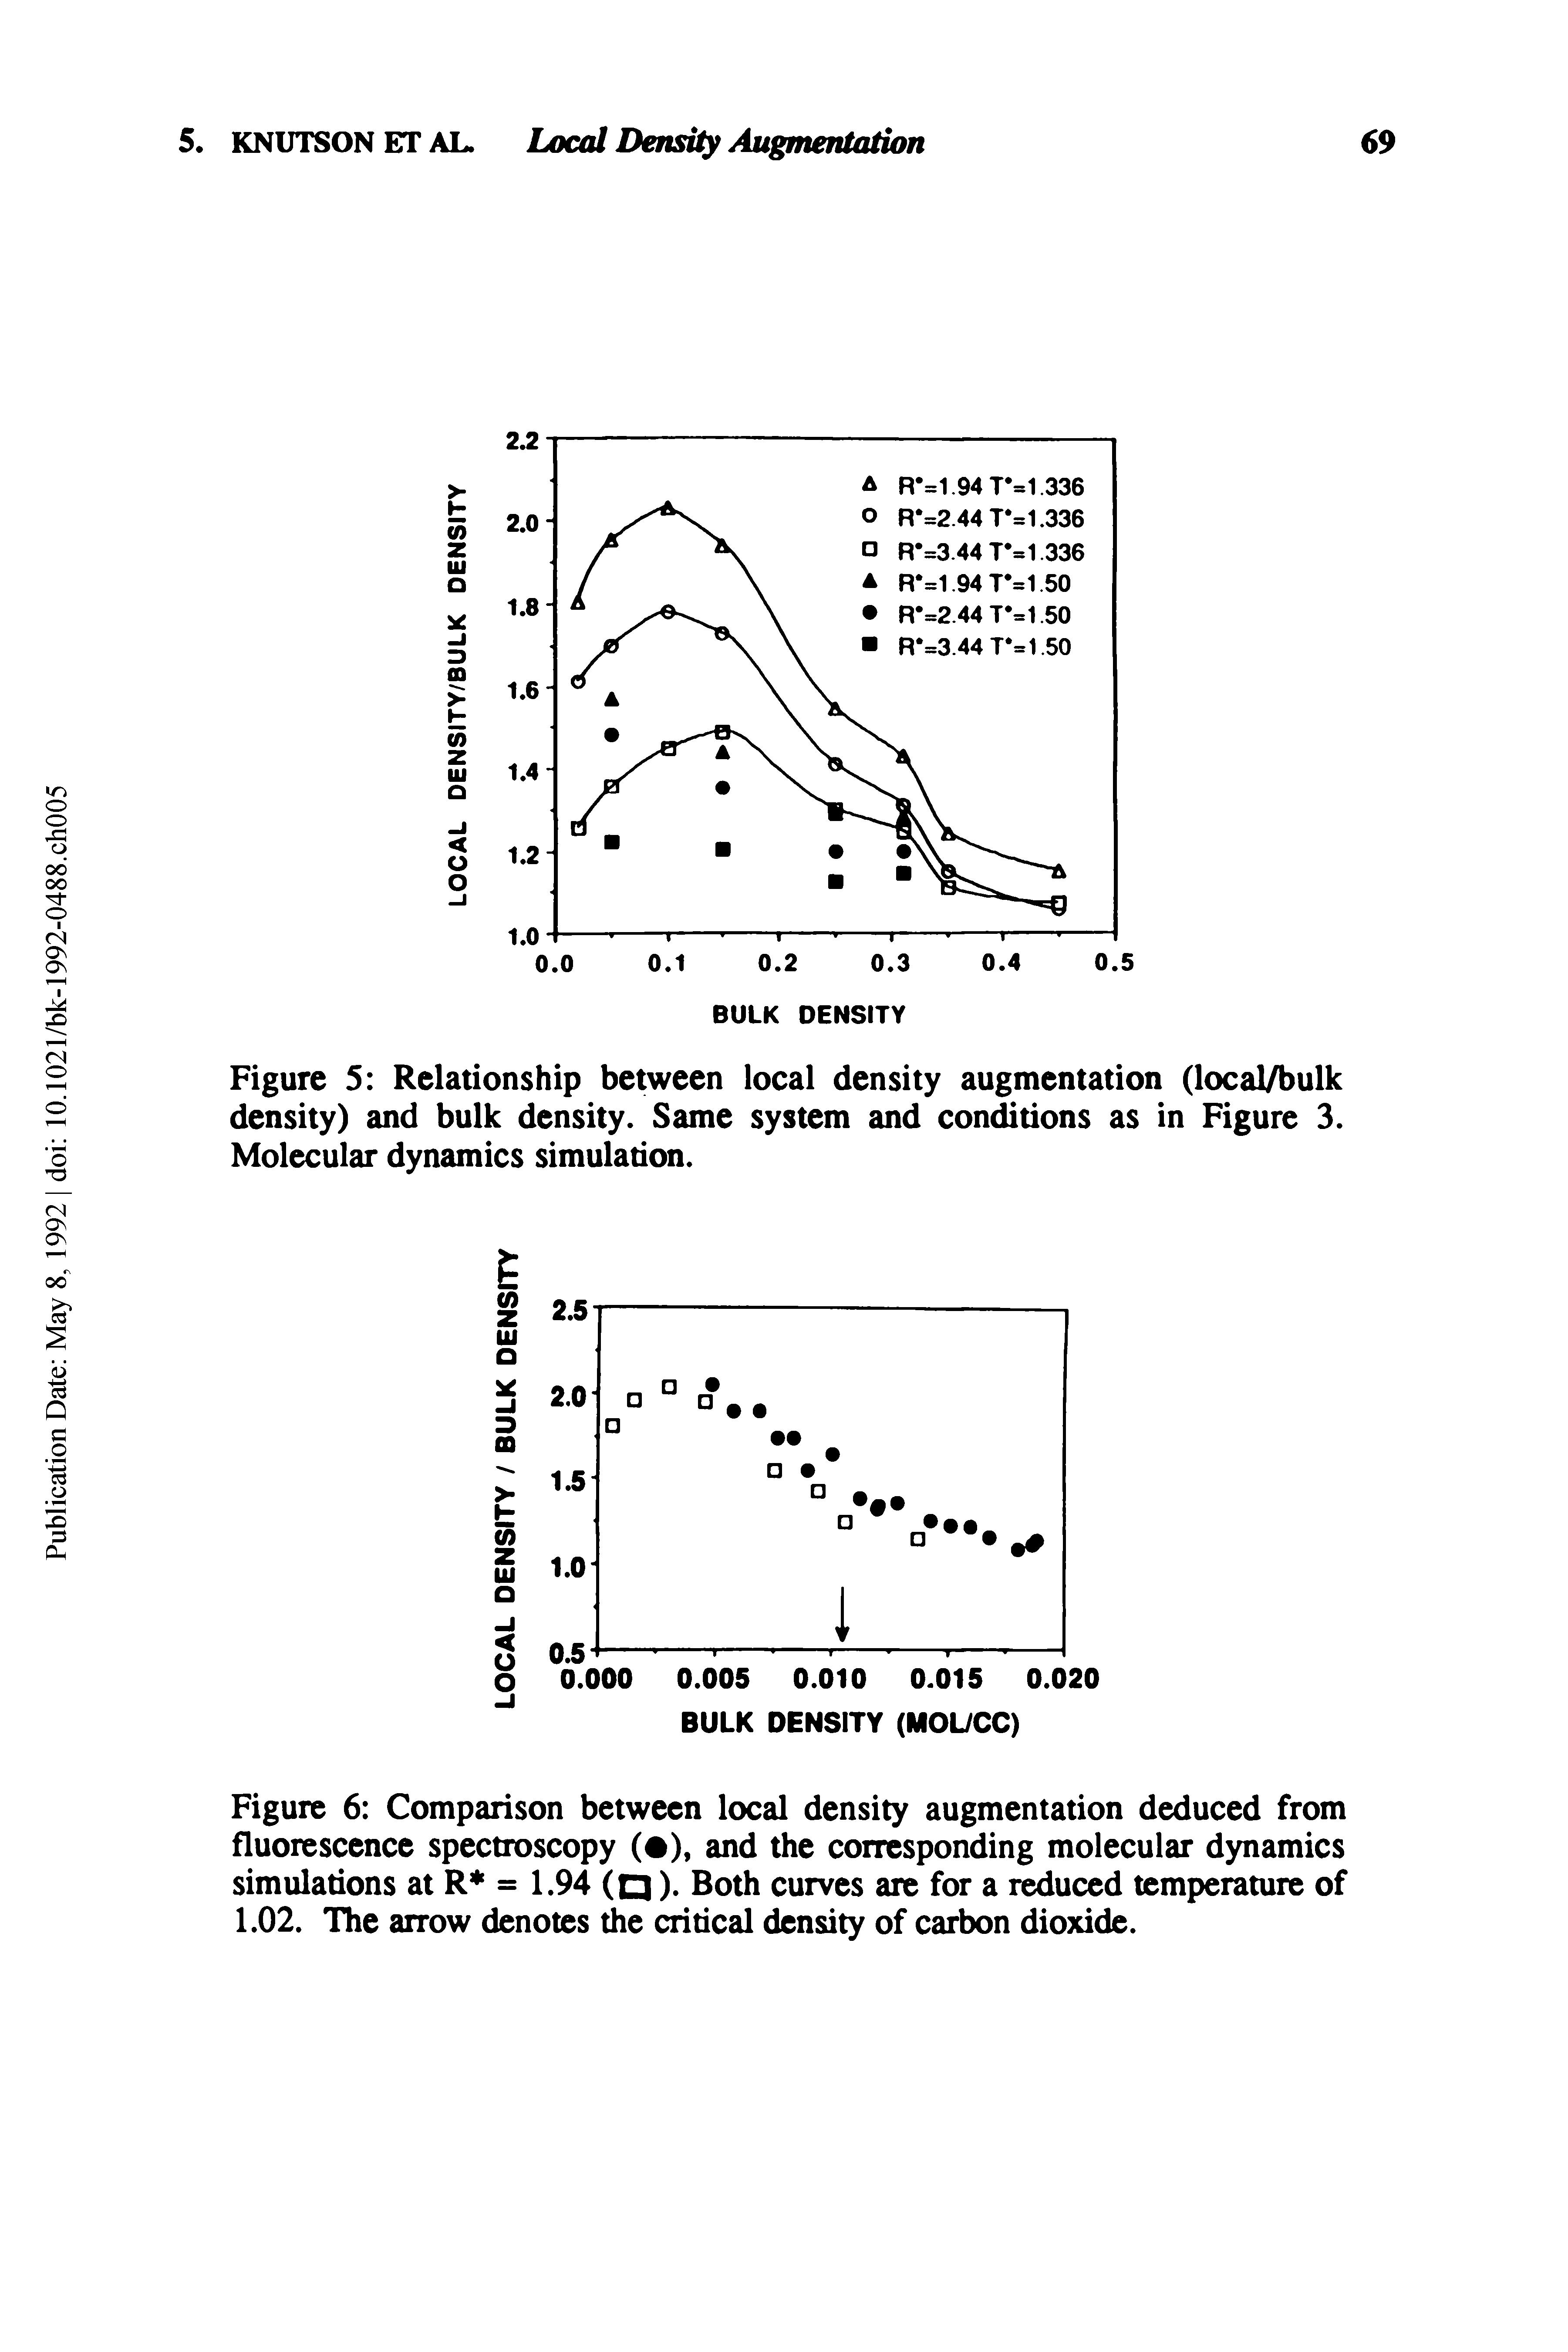 Figure 5 Relationship between local density augmentation (local/bulk density) and bulk density. Same system and conditions as in Figure 3. Molecular dynamics simulation.